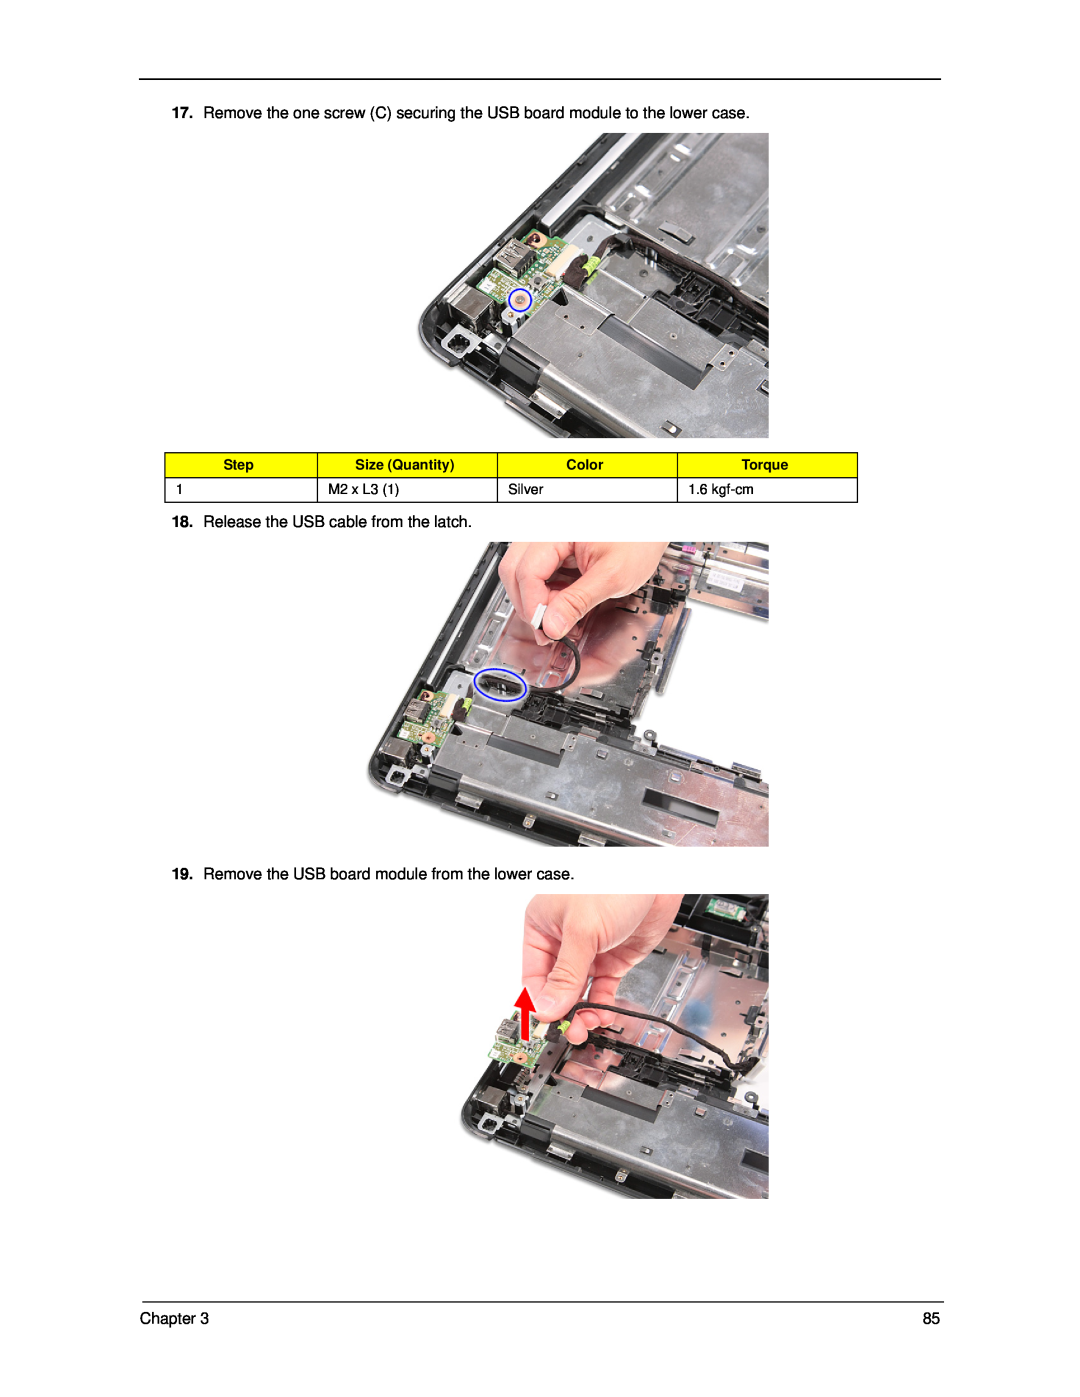 Acer 5330 Release the USB cable from the latch, Remove the USB board module from the lower case, Chapter, Step, Color 